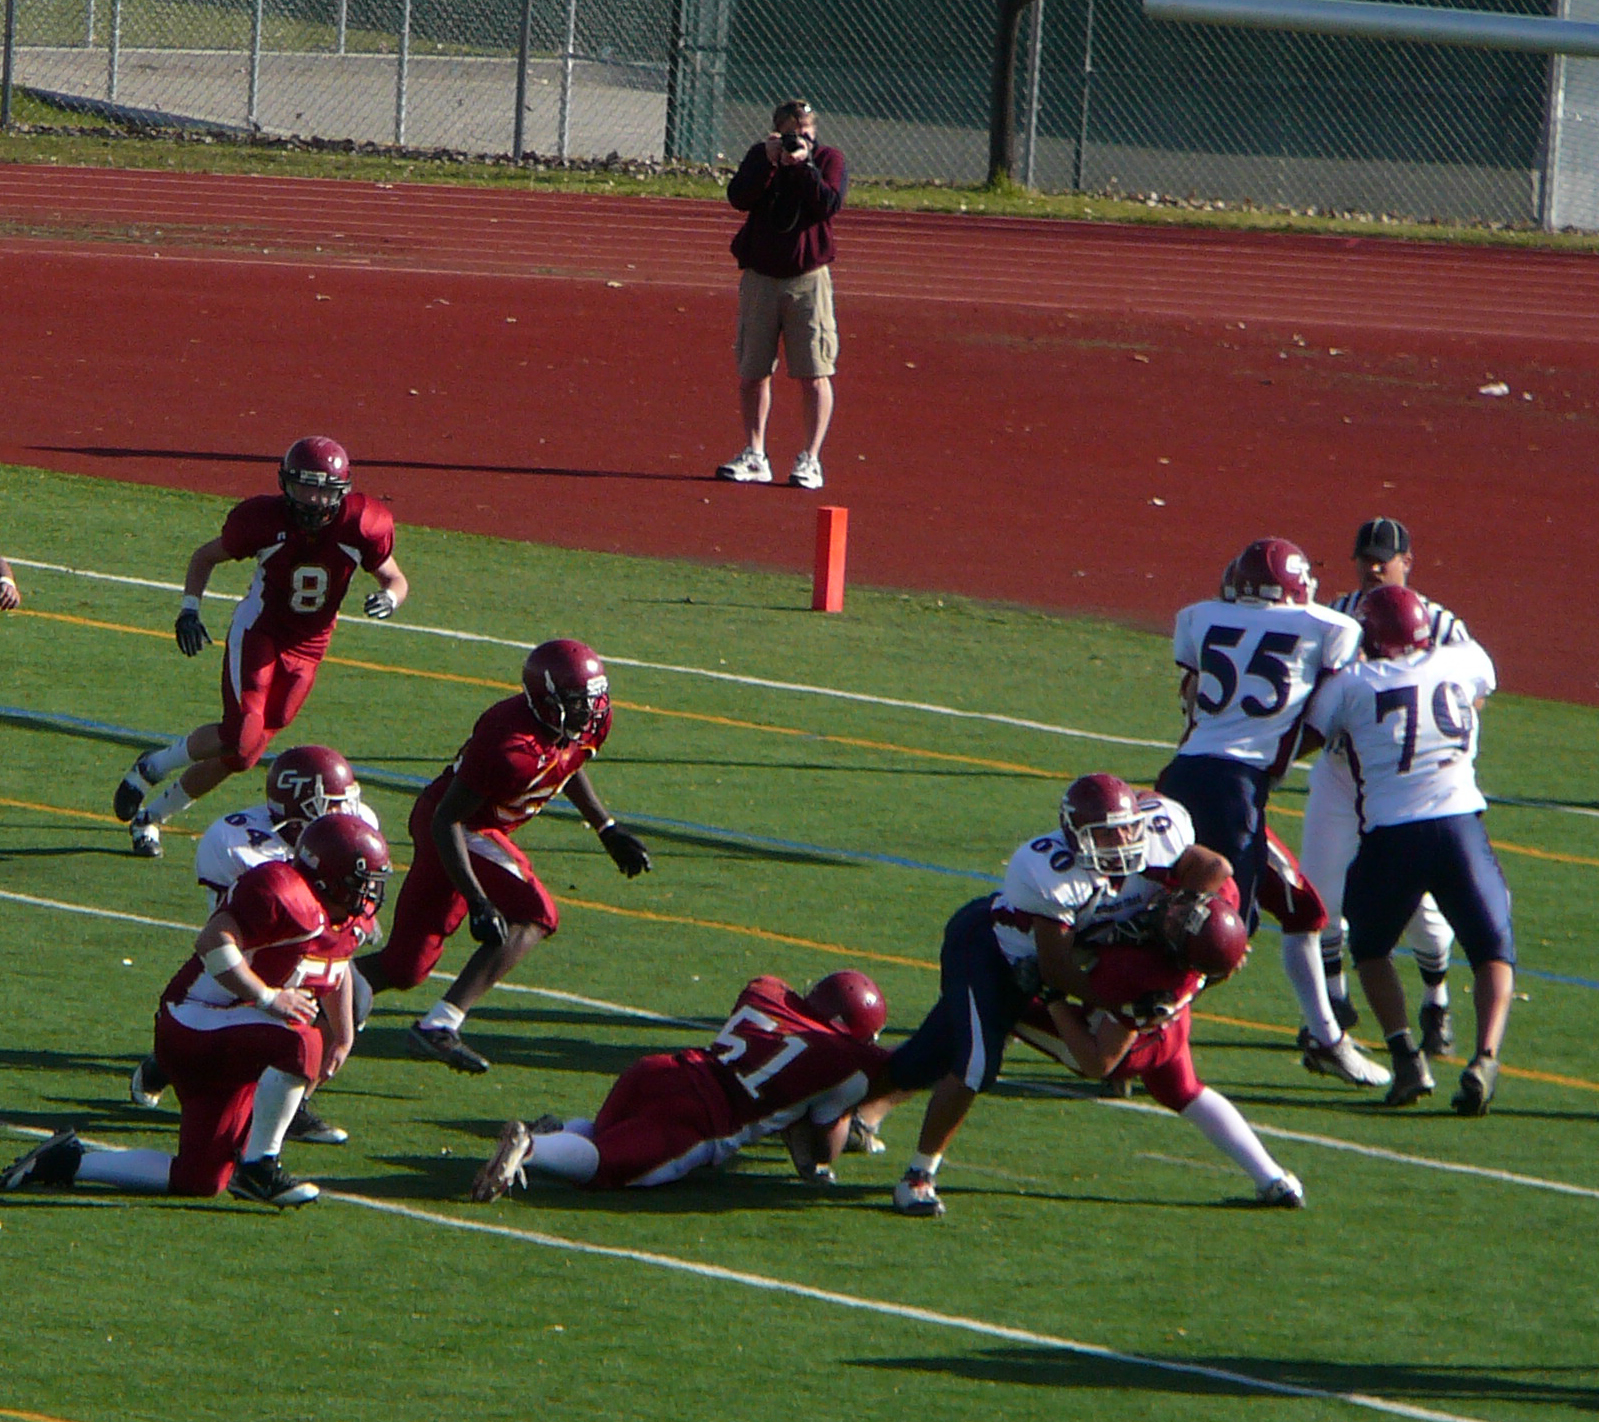 people playing football, as an individual jumps and runs with the ball